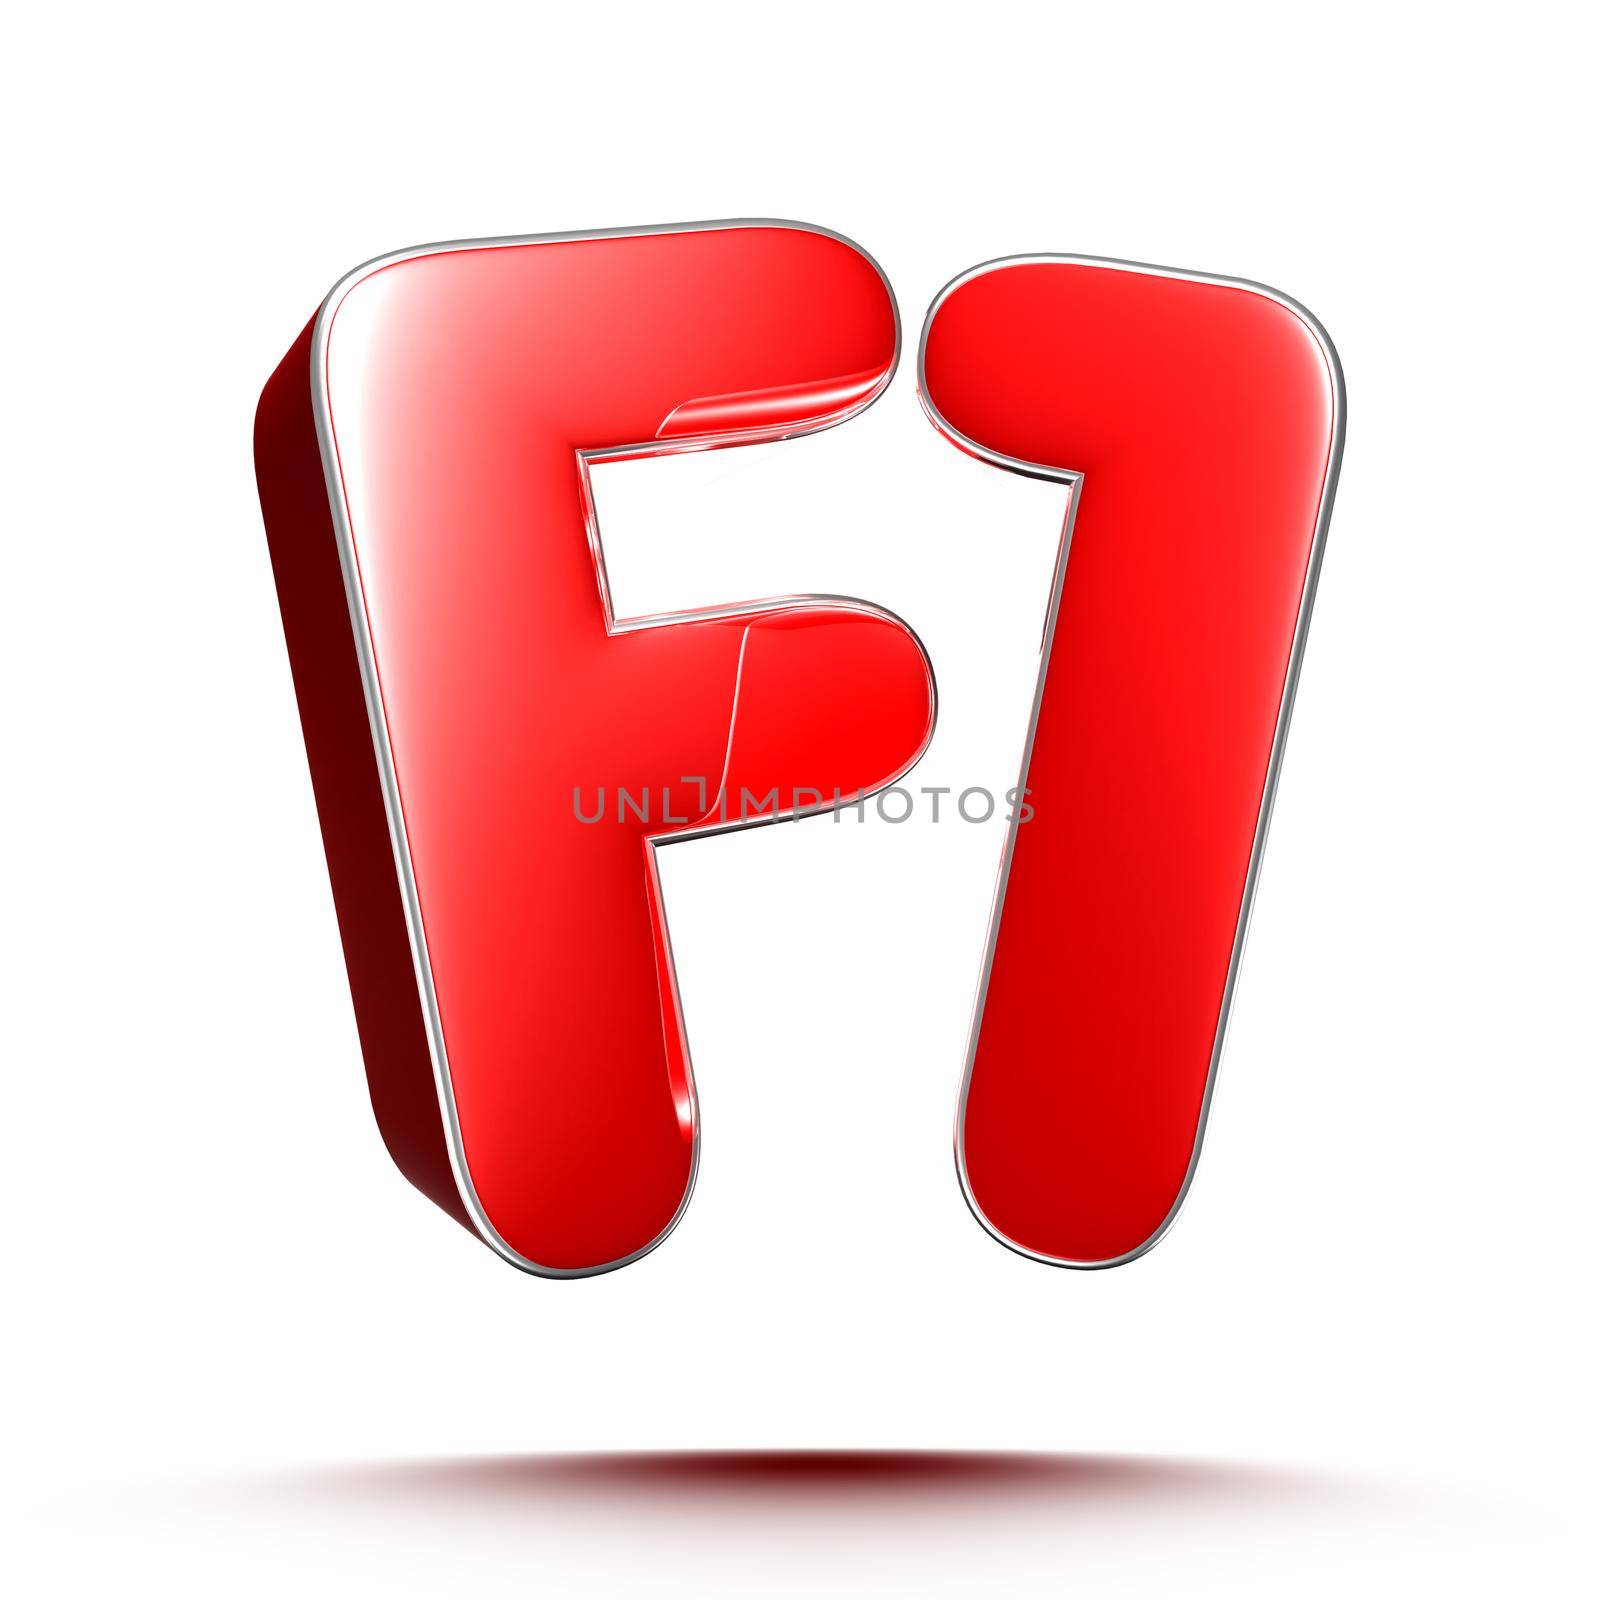 F1 red 3D illustration on white background with clipping path.